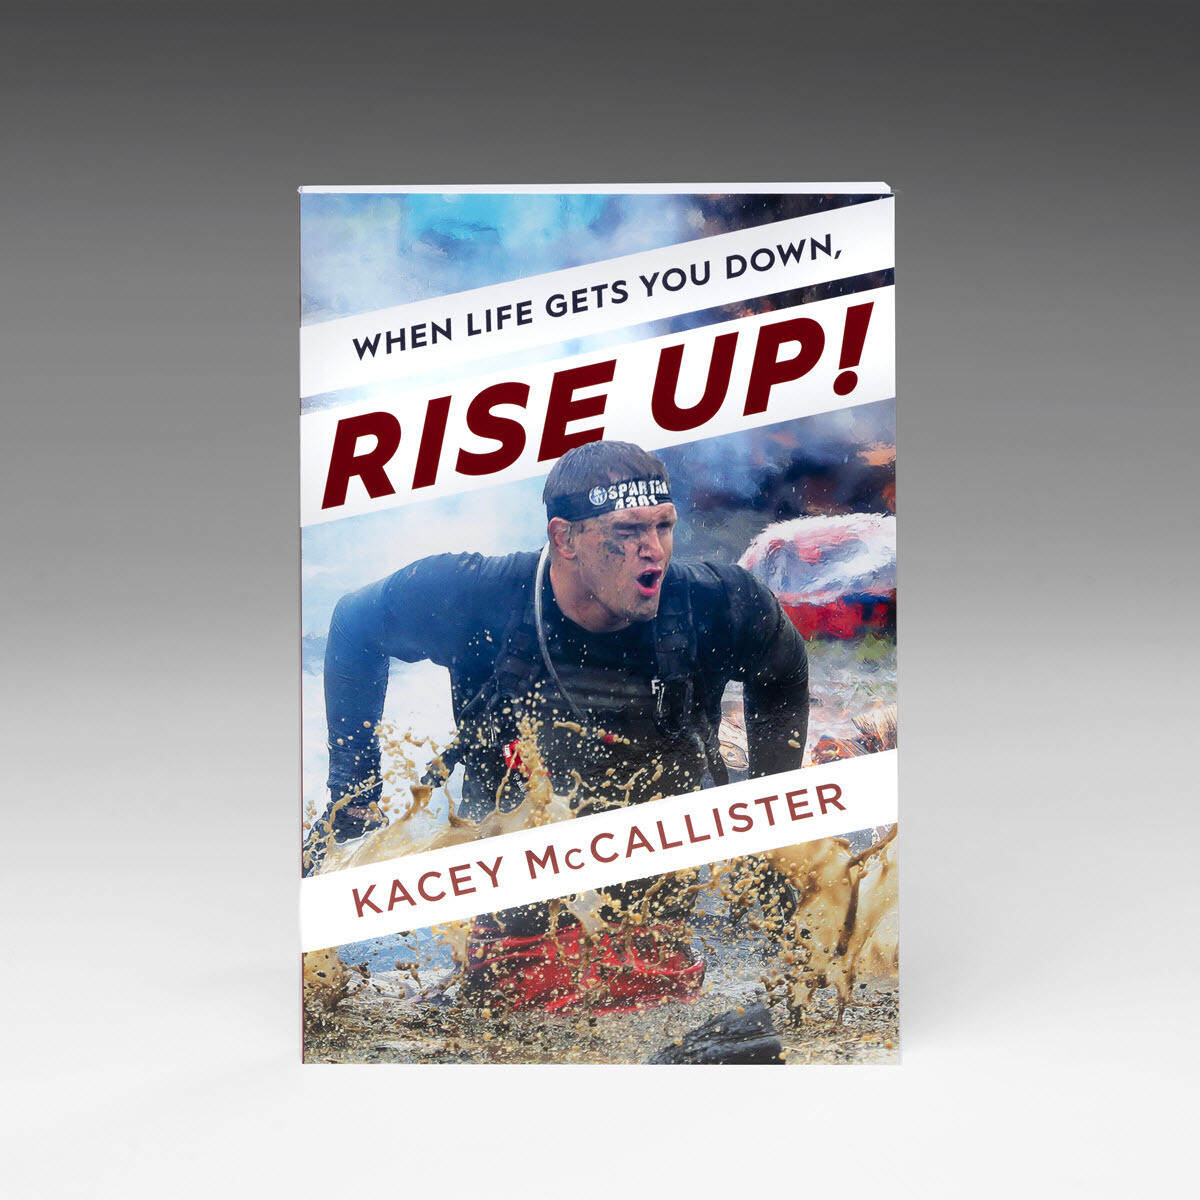 Signed: When life gets you down RISE UP